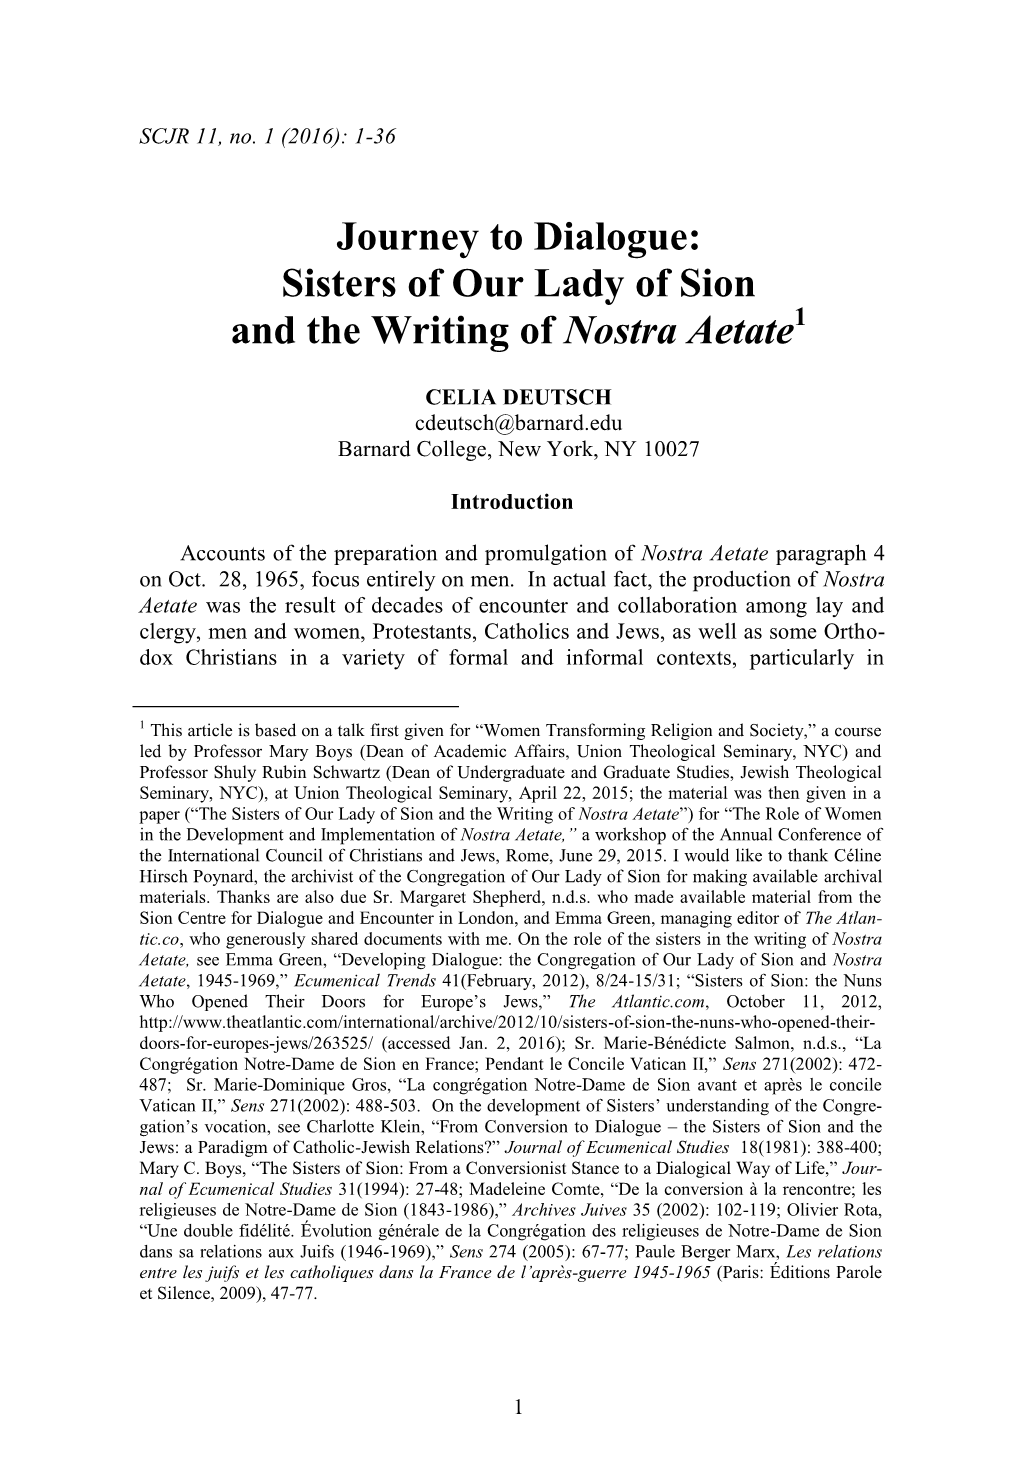 Journey to Dialogue: Sisters of Our Lady of Sion and the Writing of Nostra Aetate1